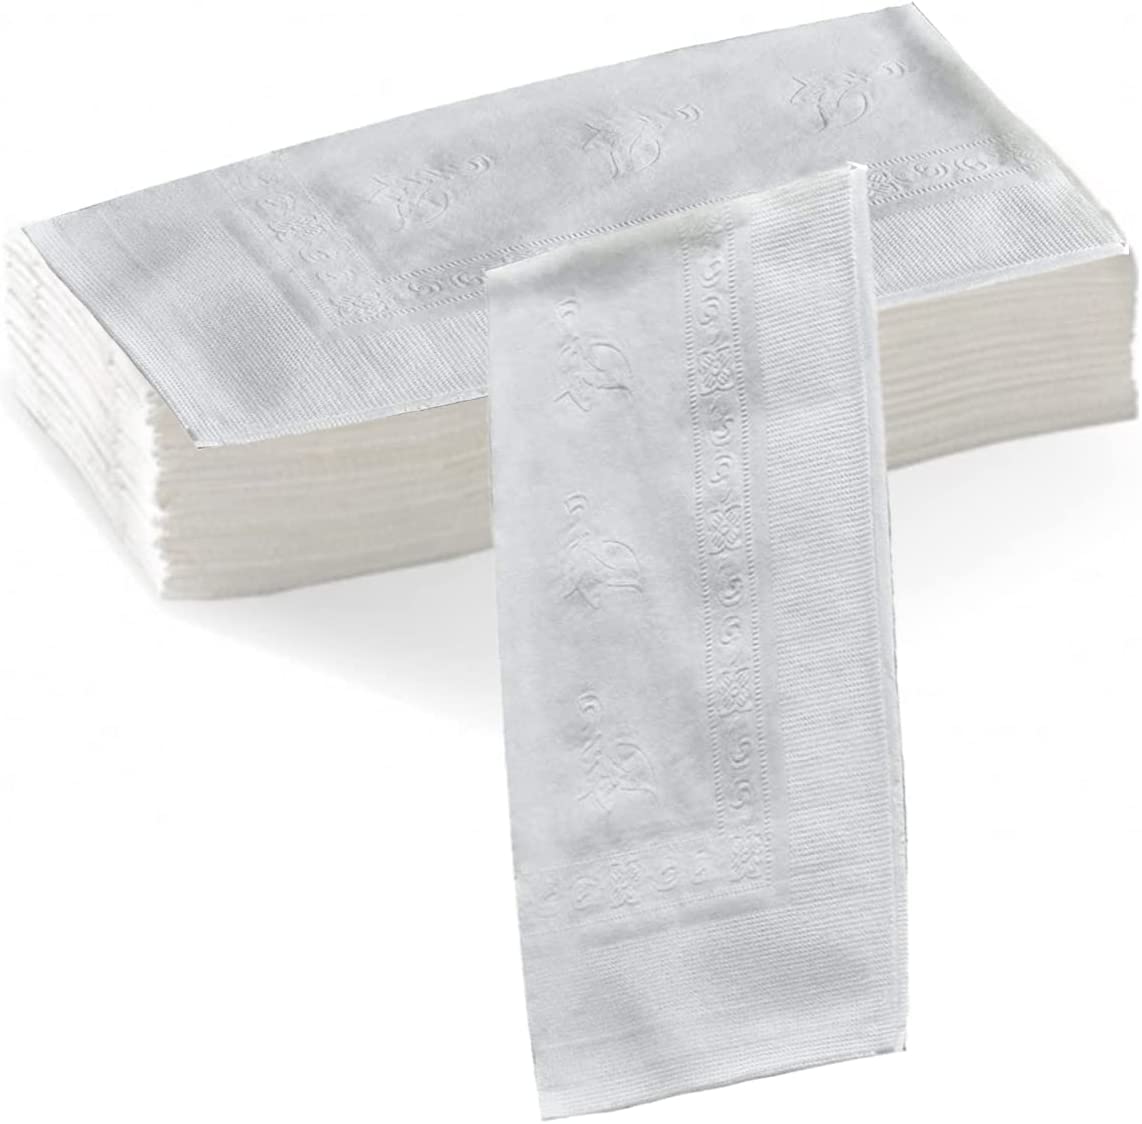 Paper Dinner Napkins - Disposable 2-Ply White Party Napkins